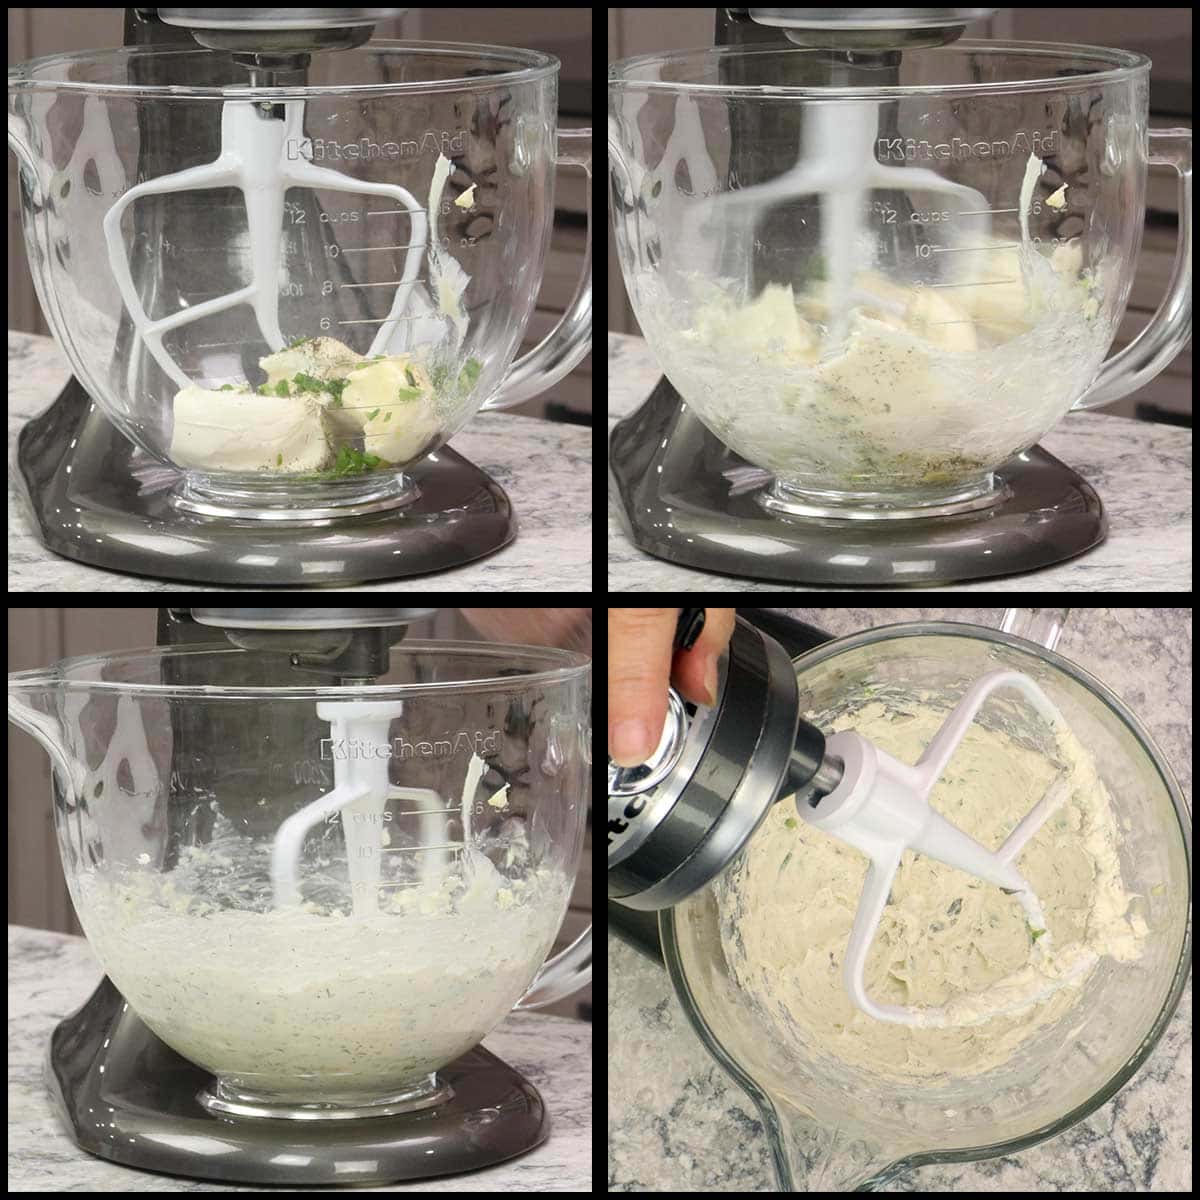 Mixing garlic and herb cheese spread with paddle attachment on stand mixer.